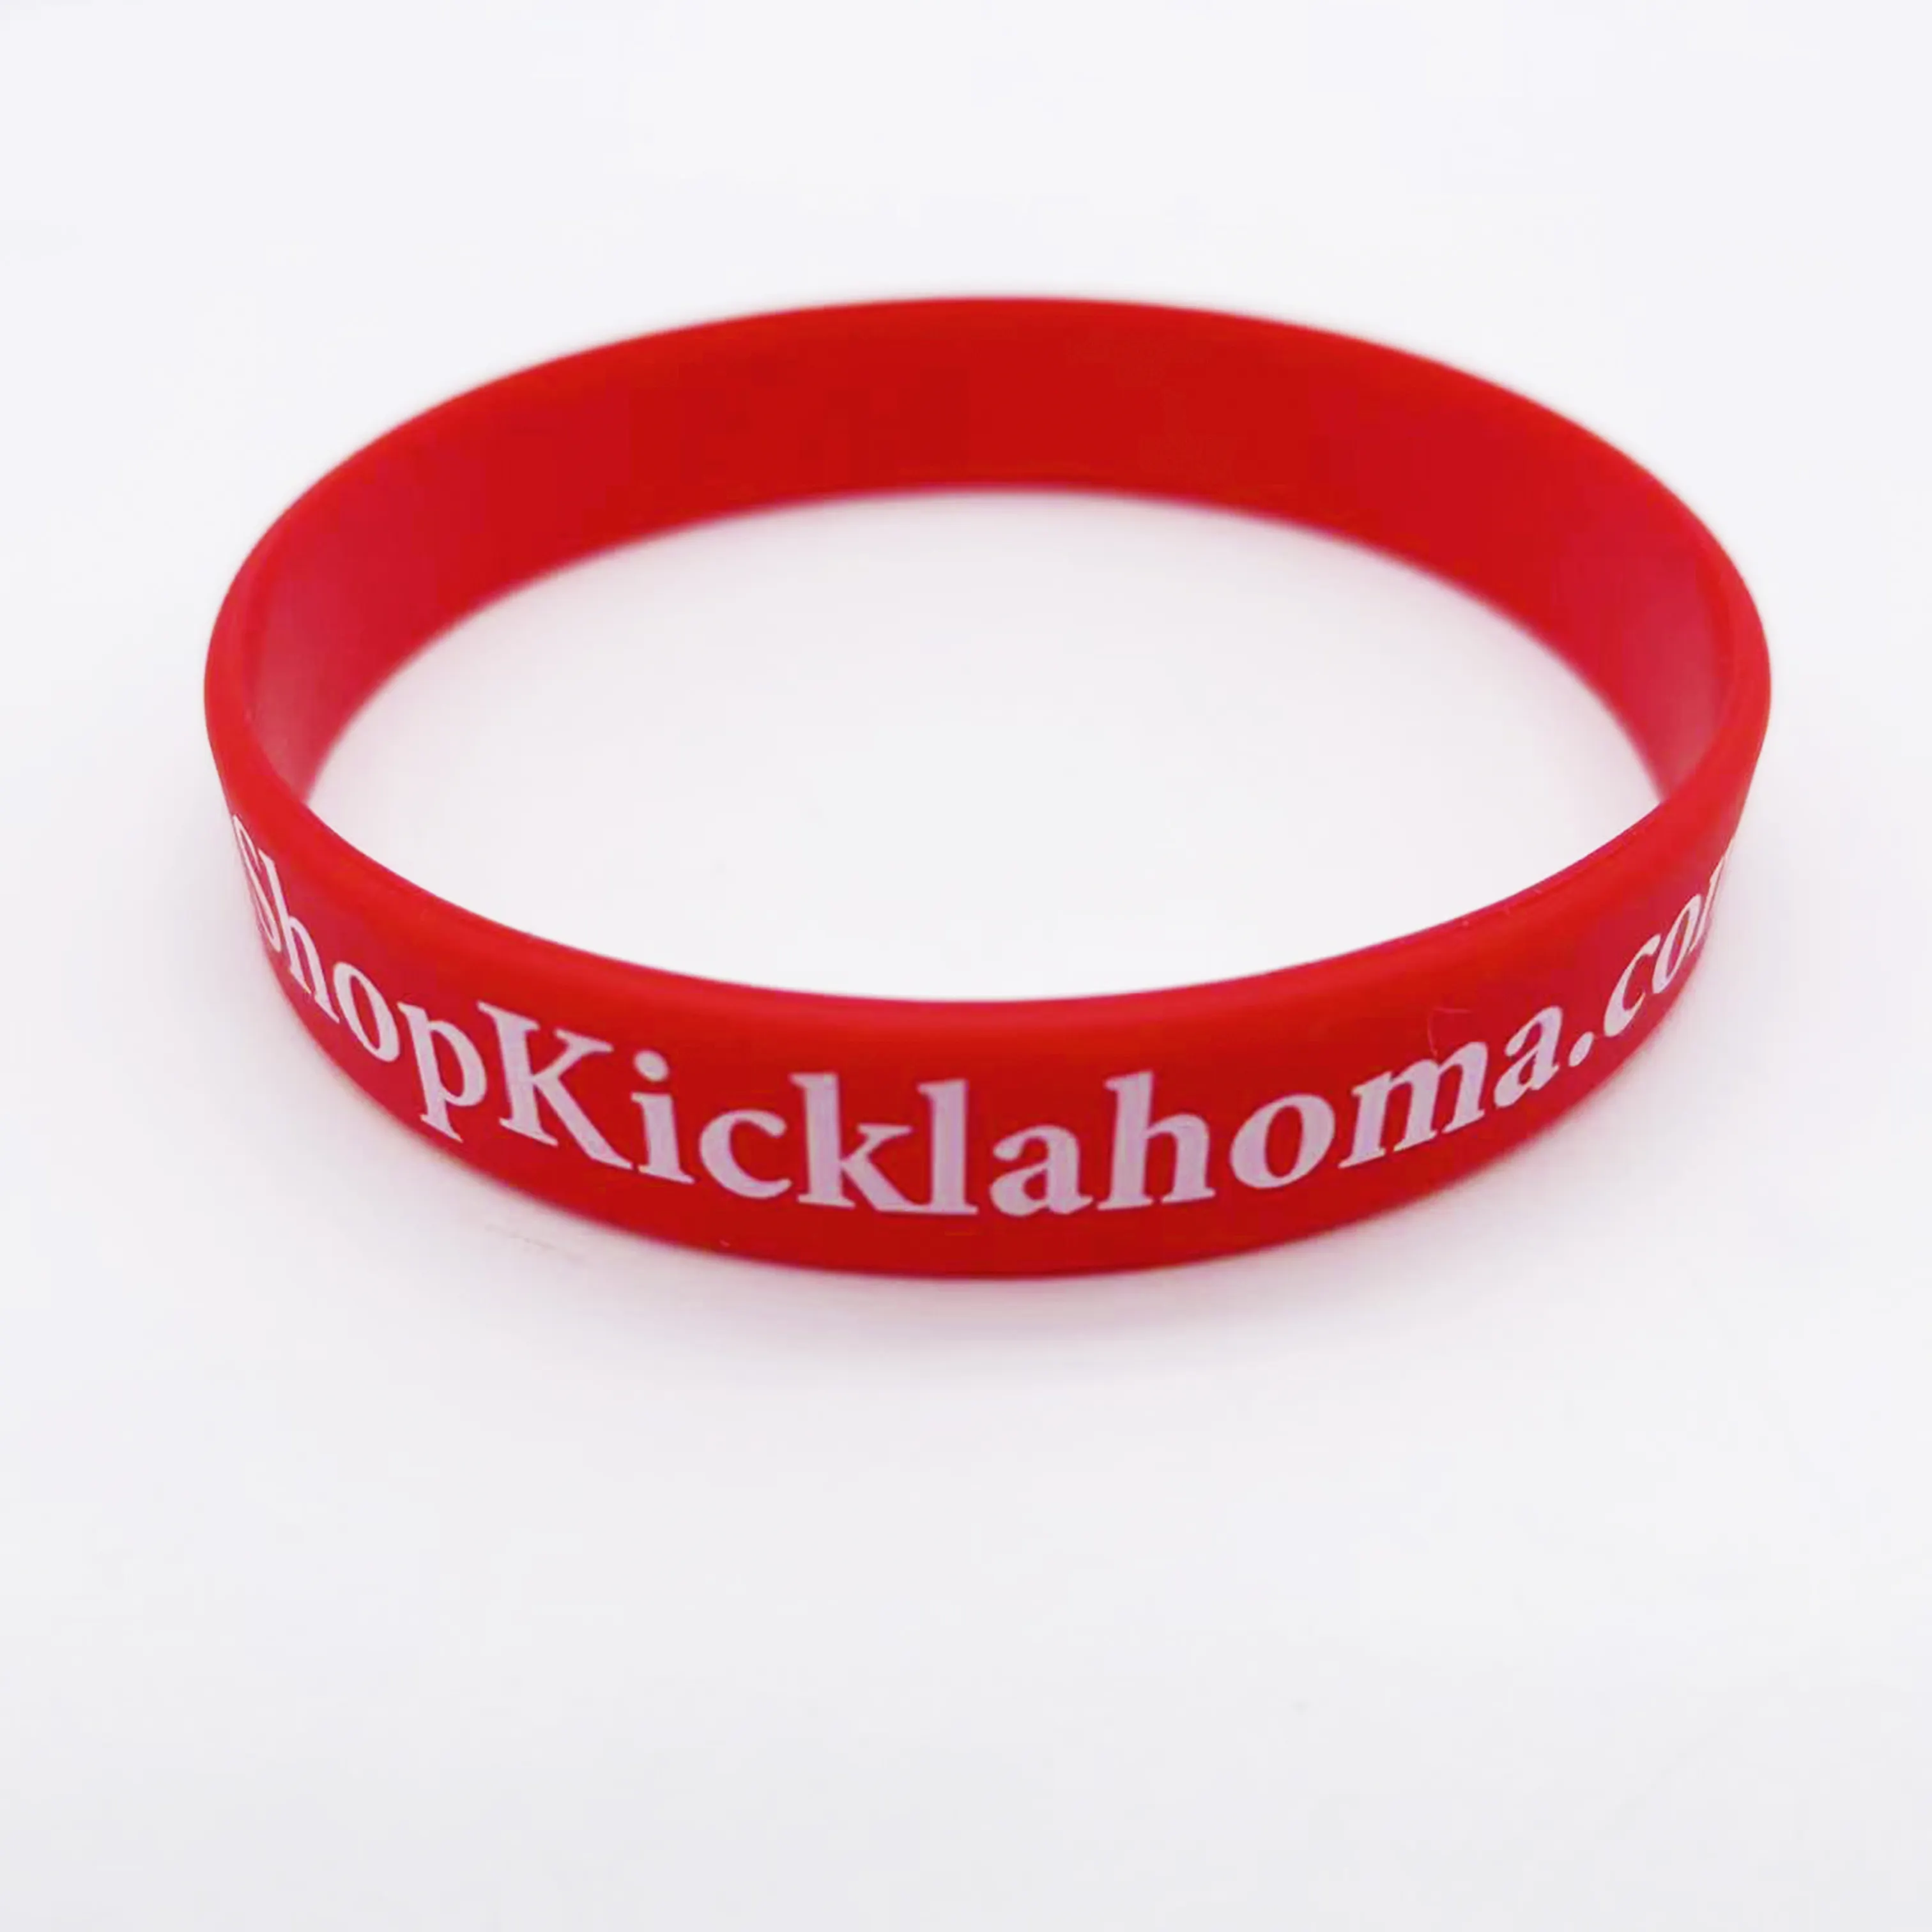 High Quality Personalized Custom Silicone Bracelets Your Own Rubber Wristbands With Message or Logo, Silicone Wrist Band